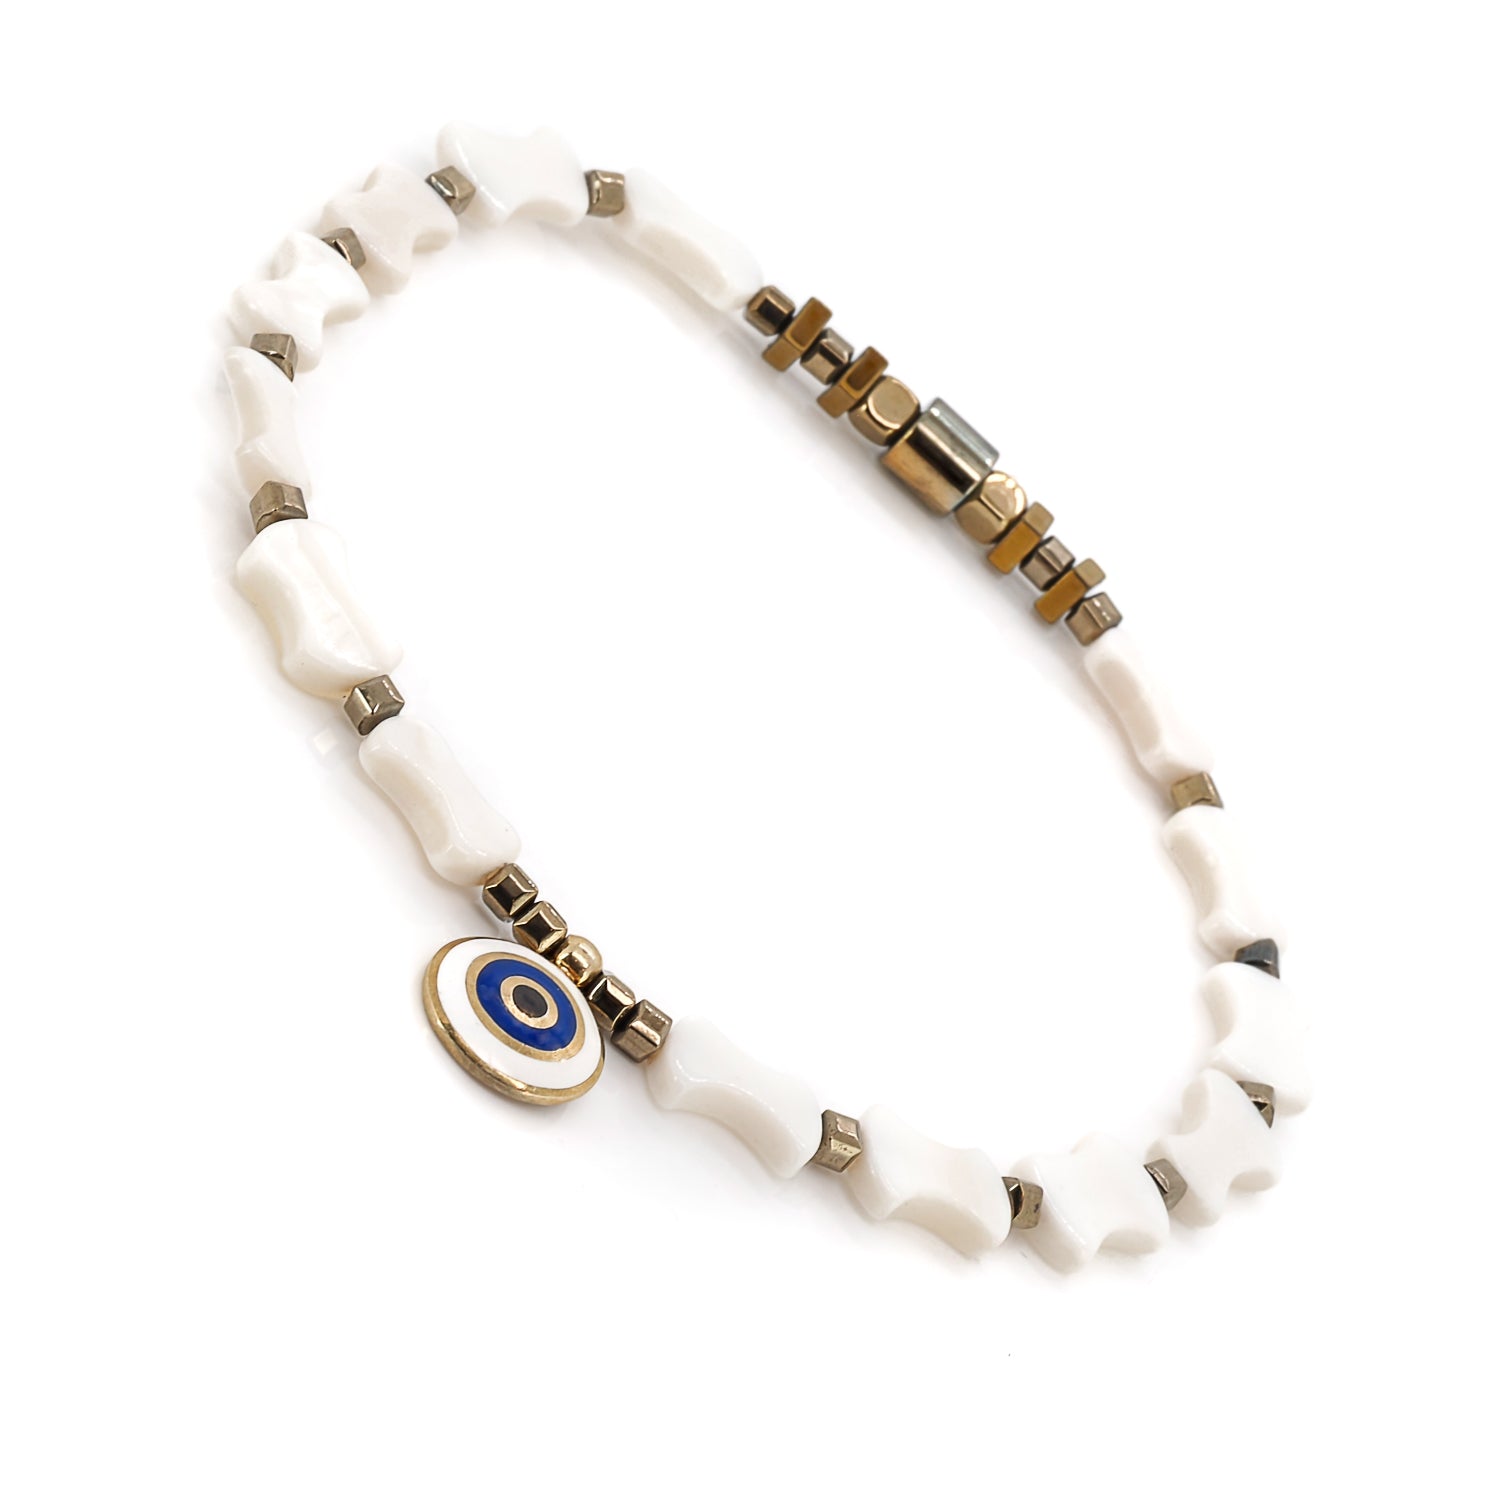 Protective Evil Eye - Blue and white enamel guards against negativity.